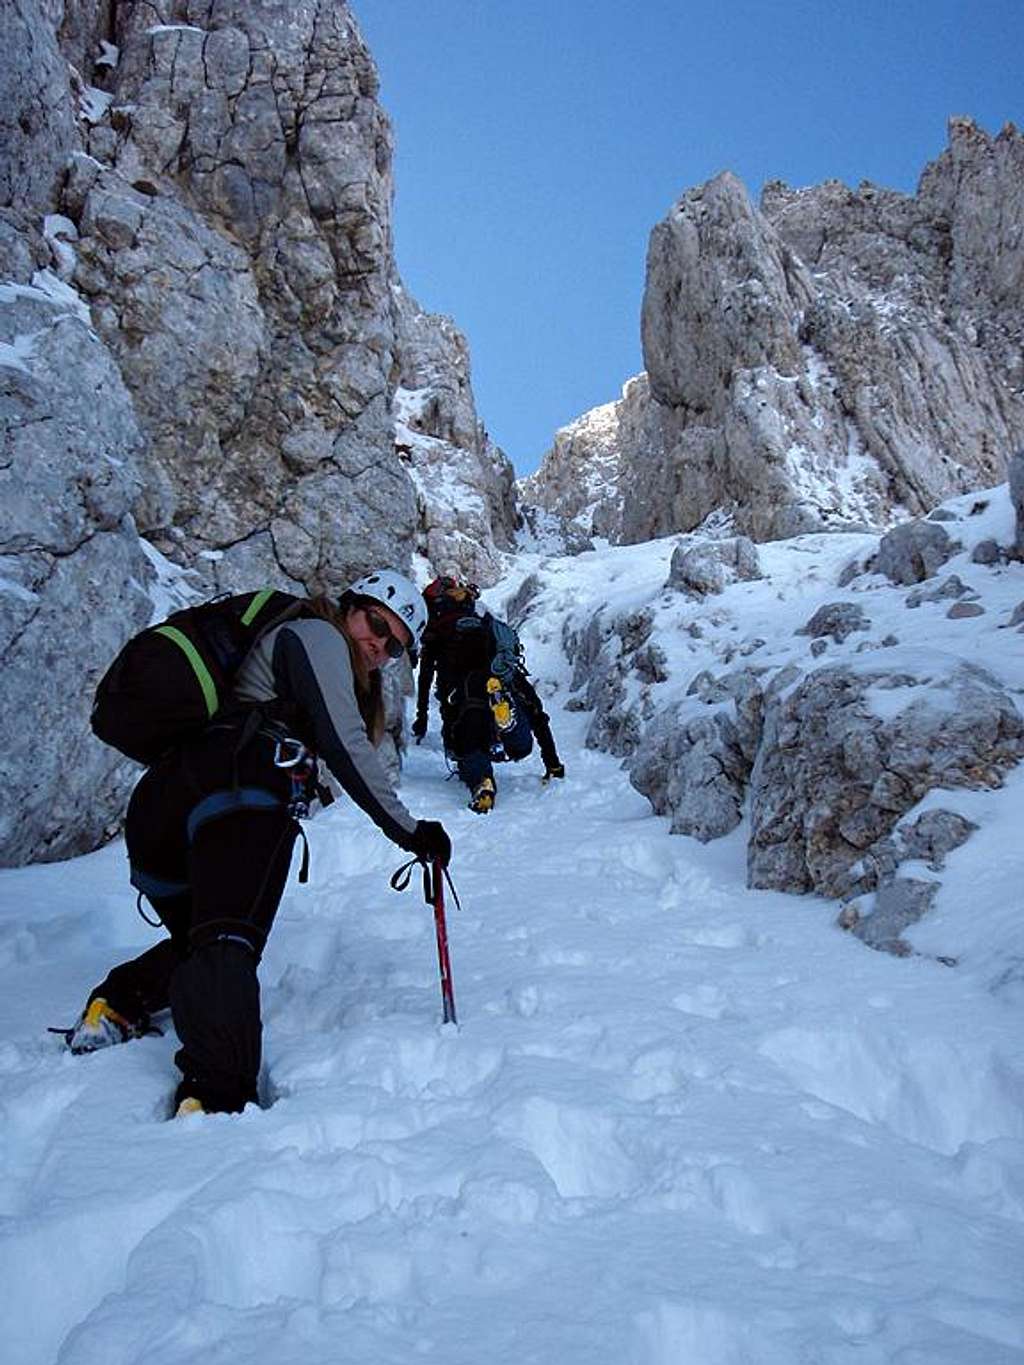 Entering in the couloir